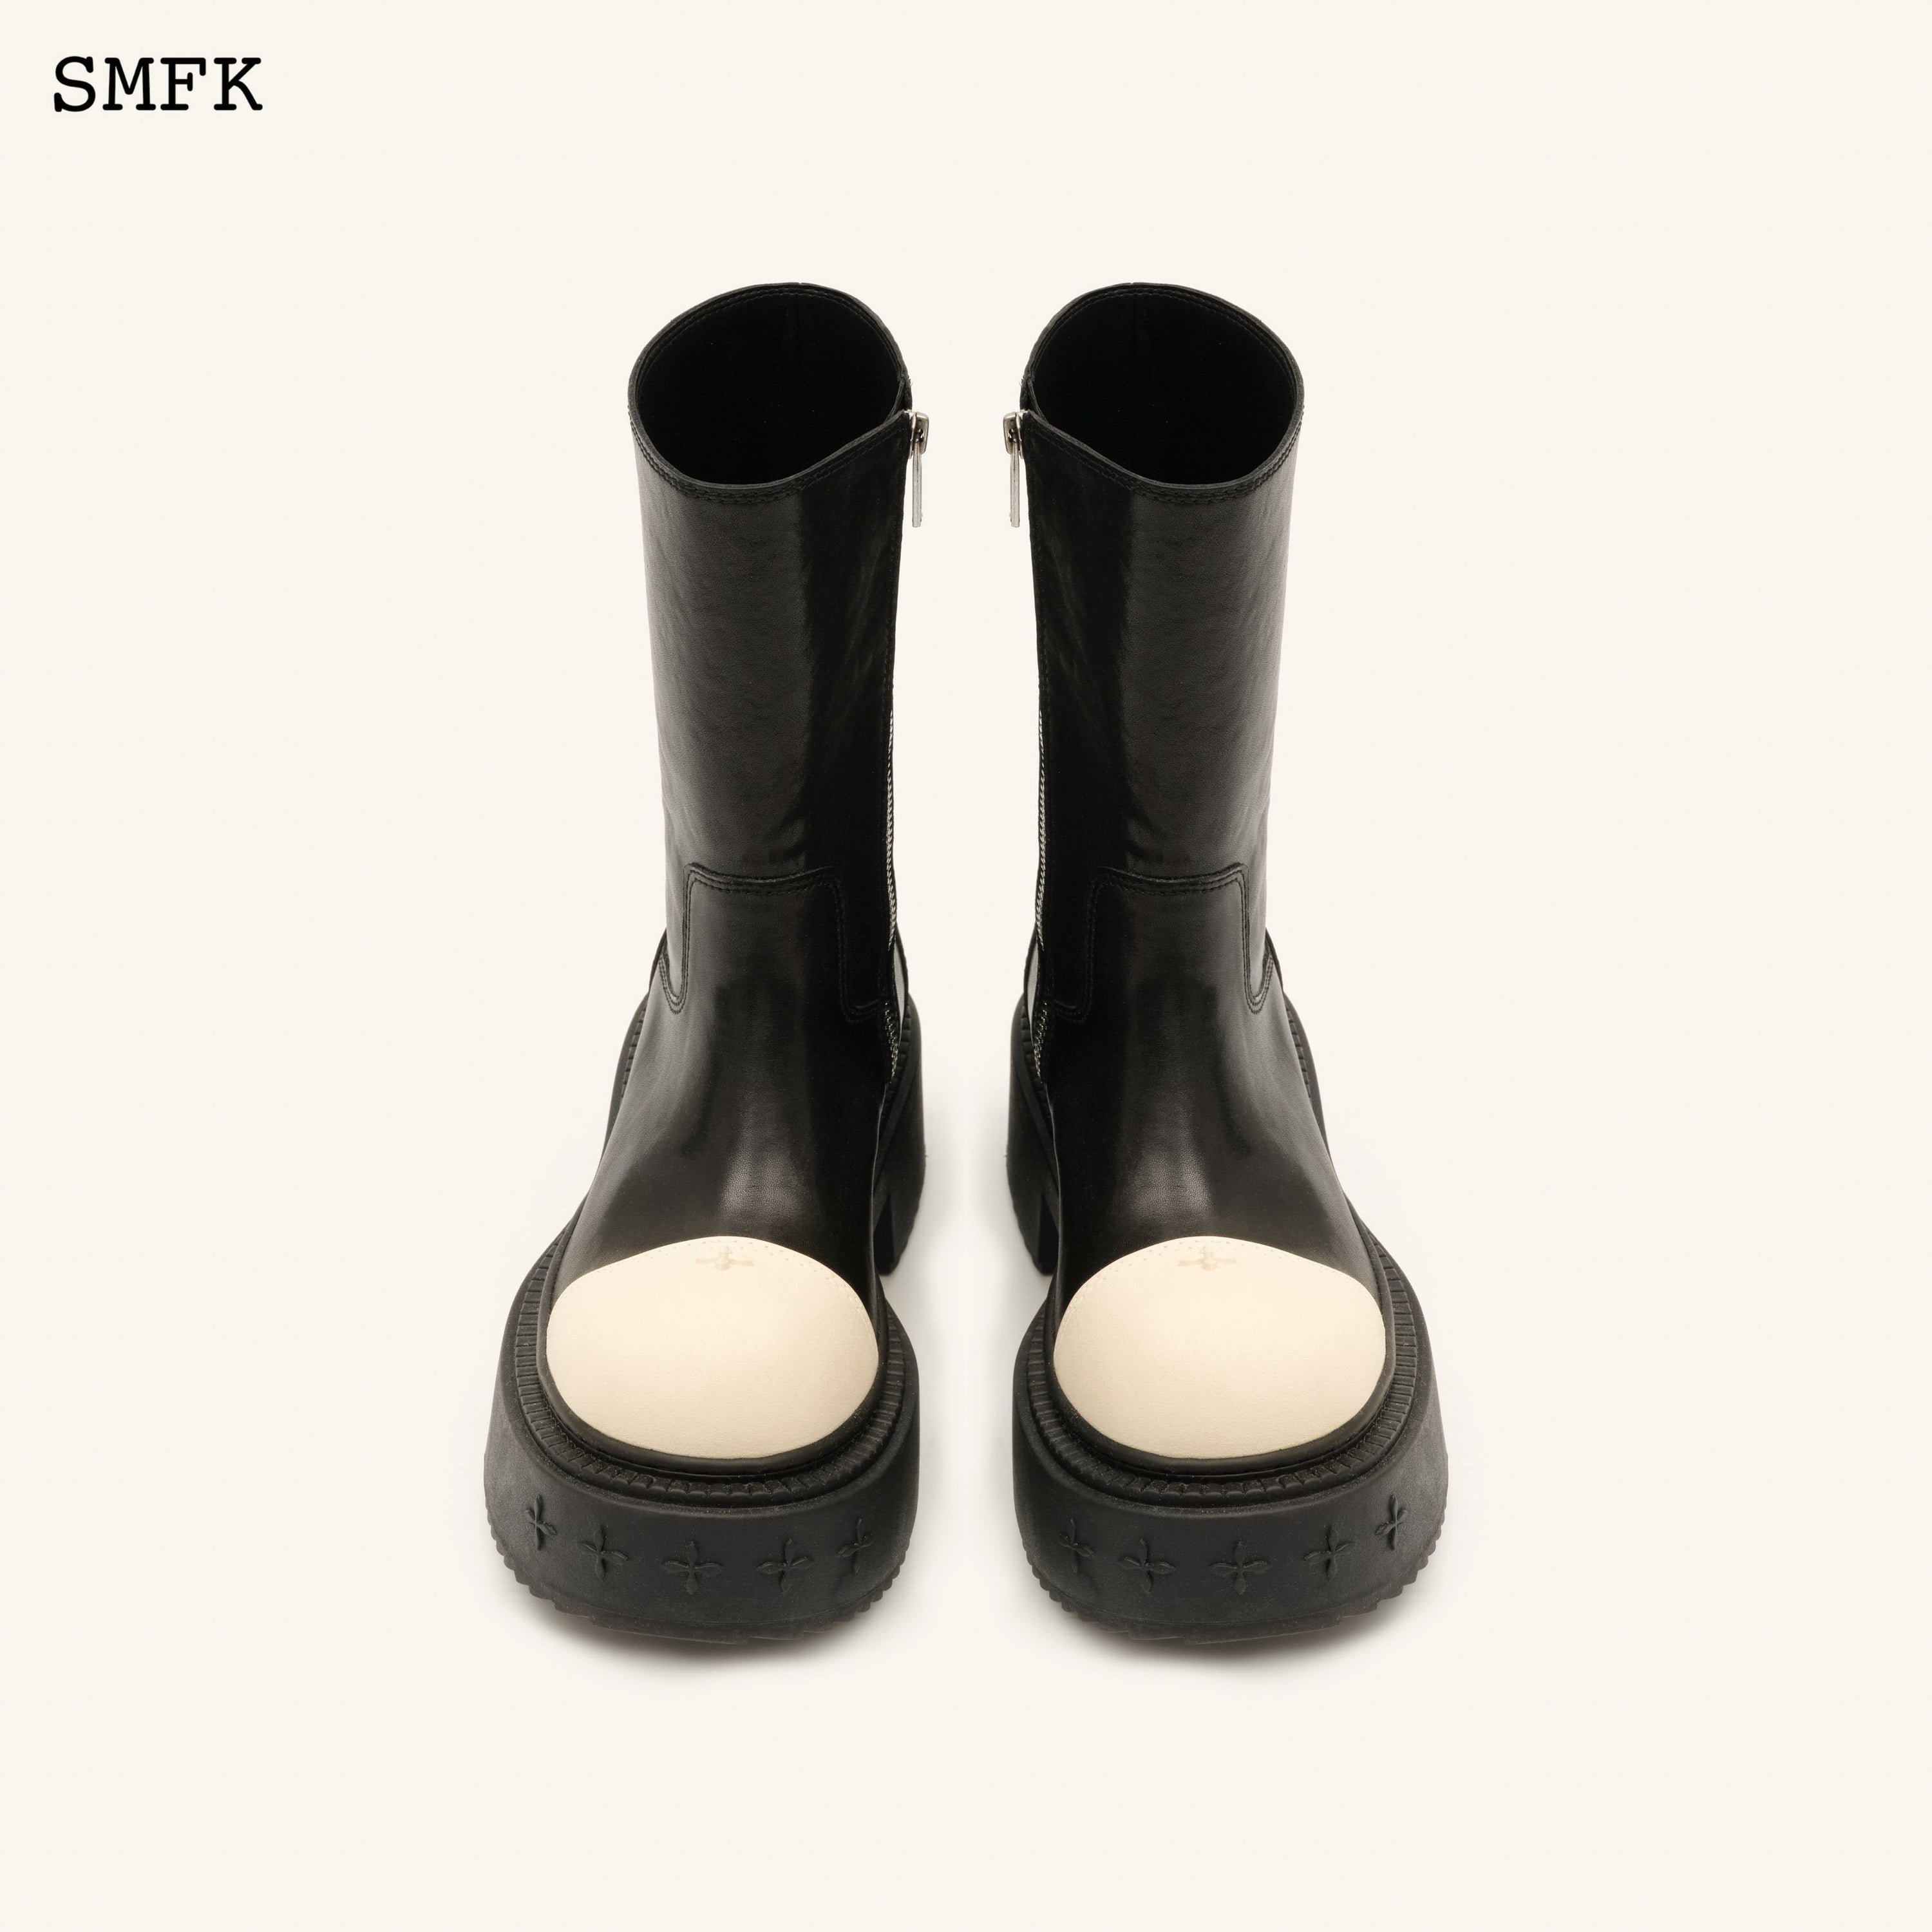 Compass Rider Low Boots In Black And White - SMFK Official